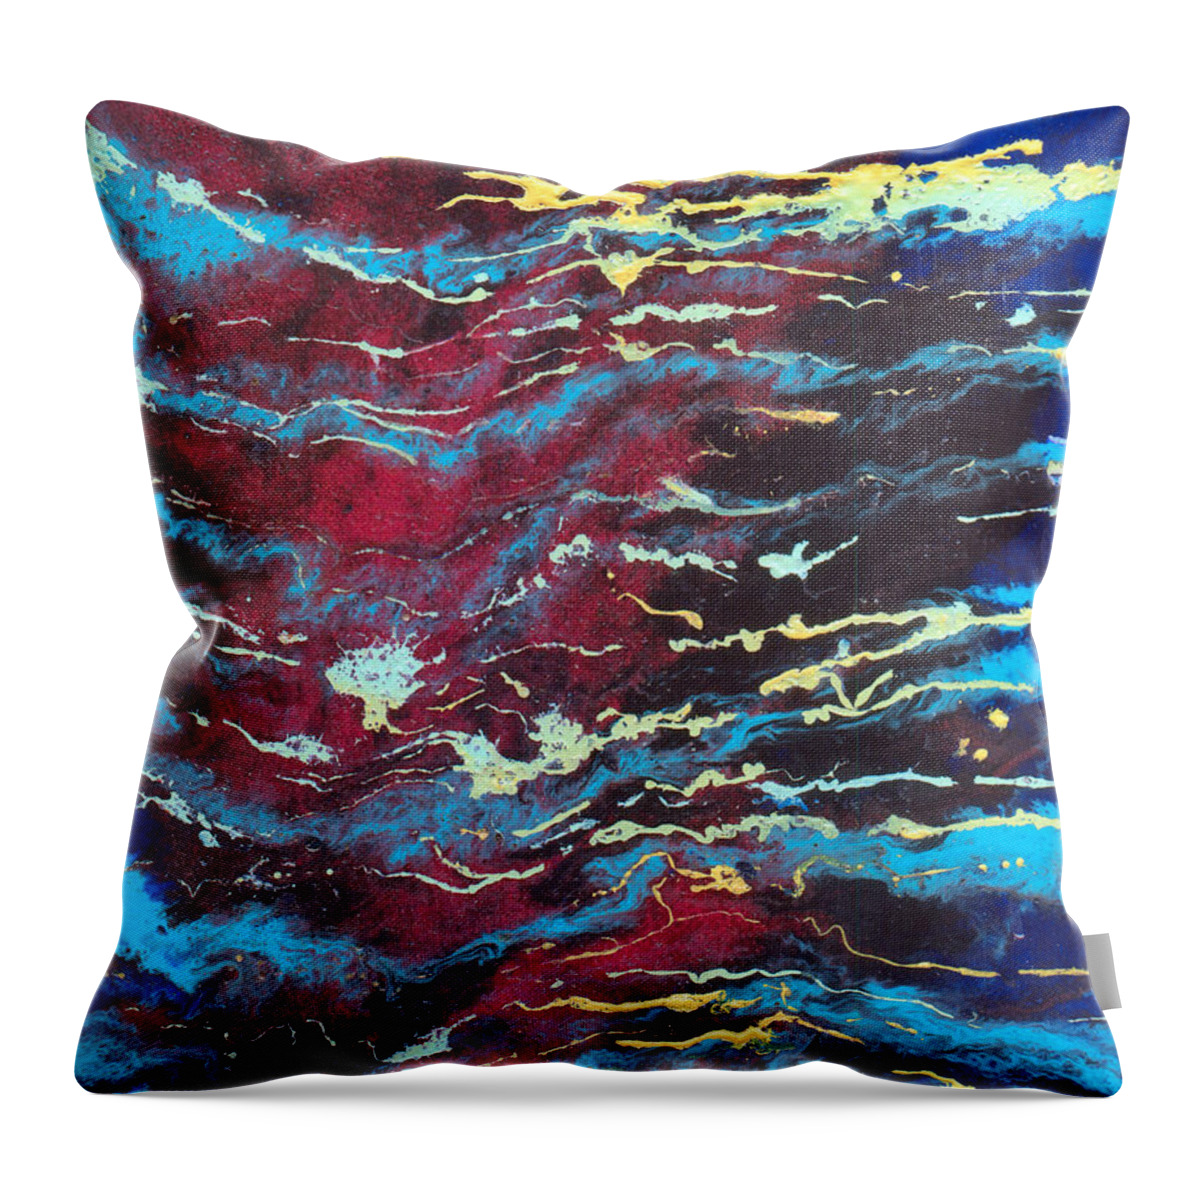 Resin Art Throw Pillow featuring the mixed media Tempted #1 by Jane Biven